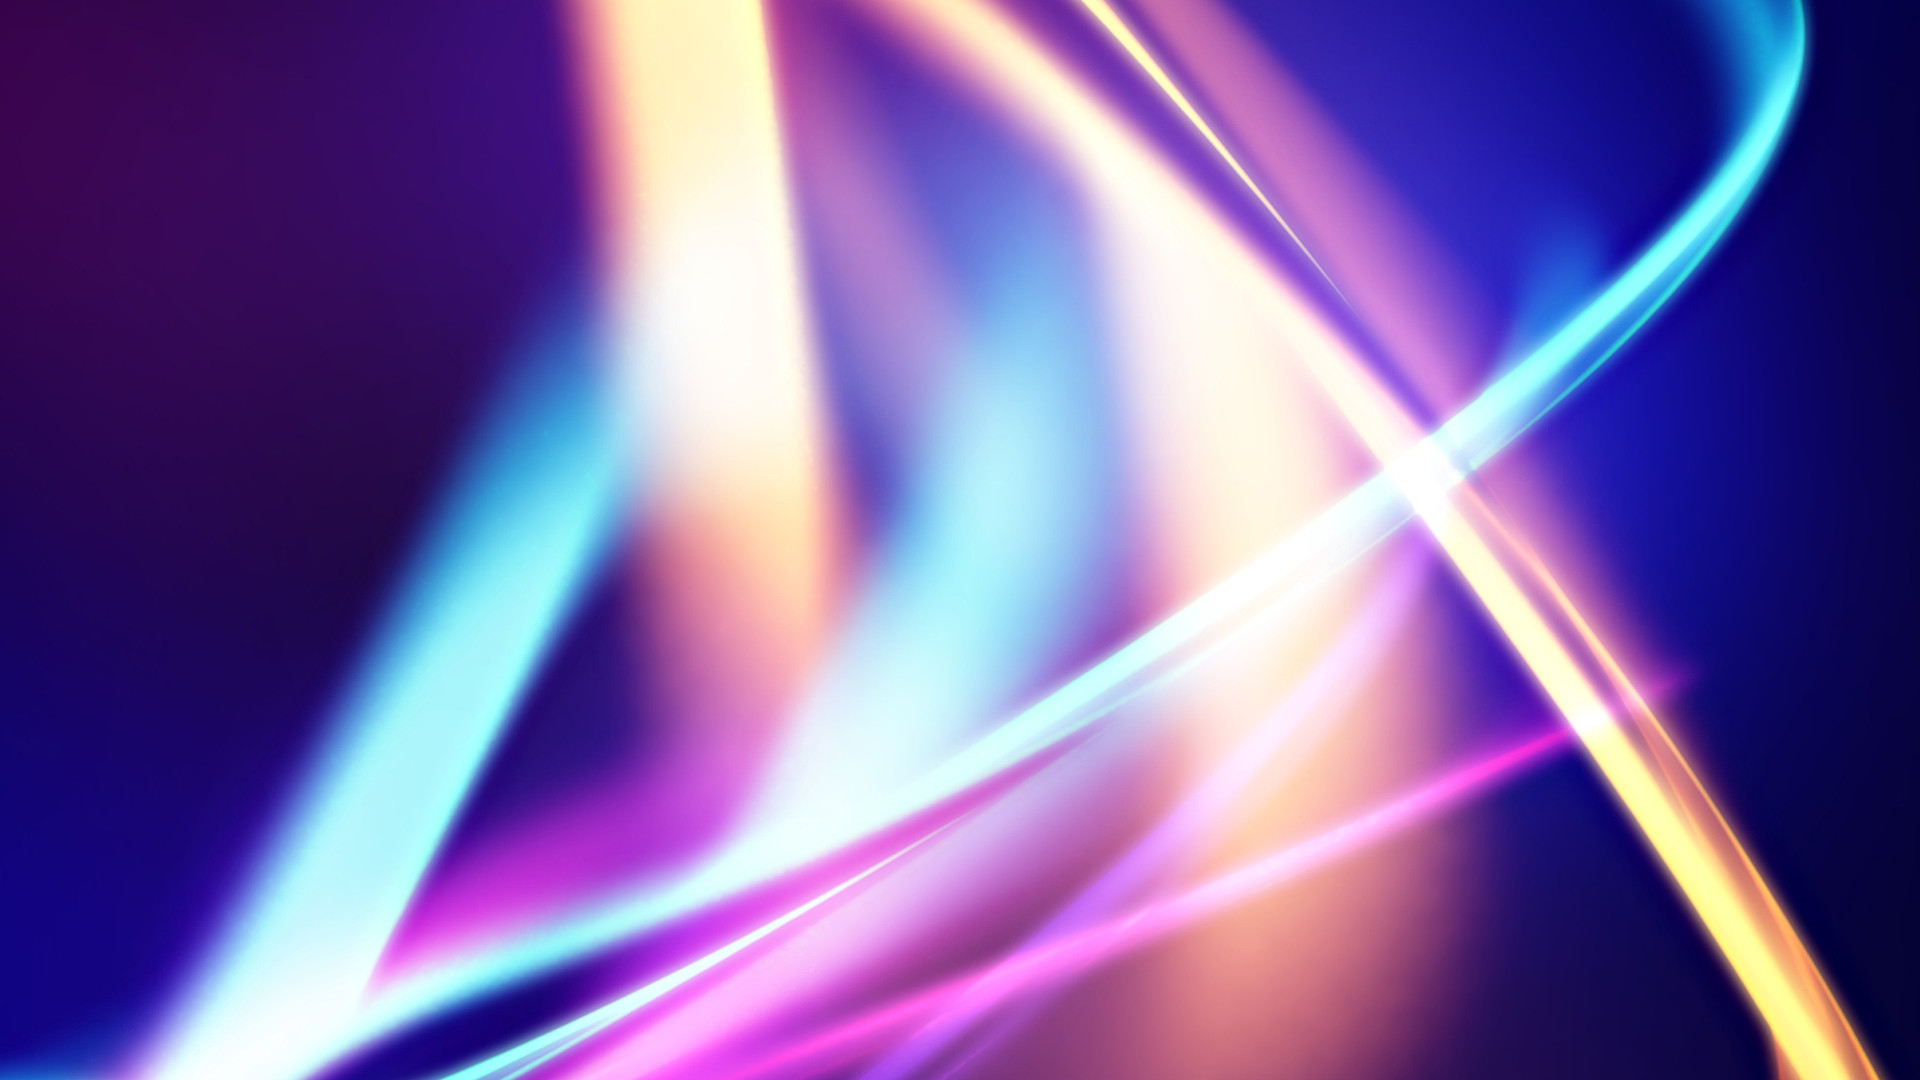 1920x1080 abstract neon wallpapers hd hd wallpapers desktop images download free  windows wallpapers amazing picture lovely 1920Ã1080 Wallpaper HD